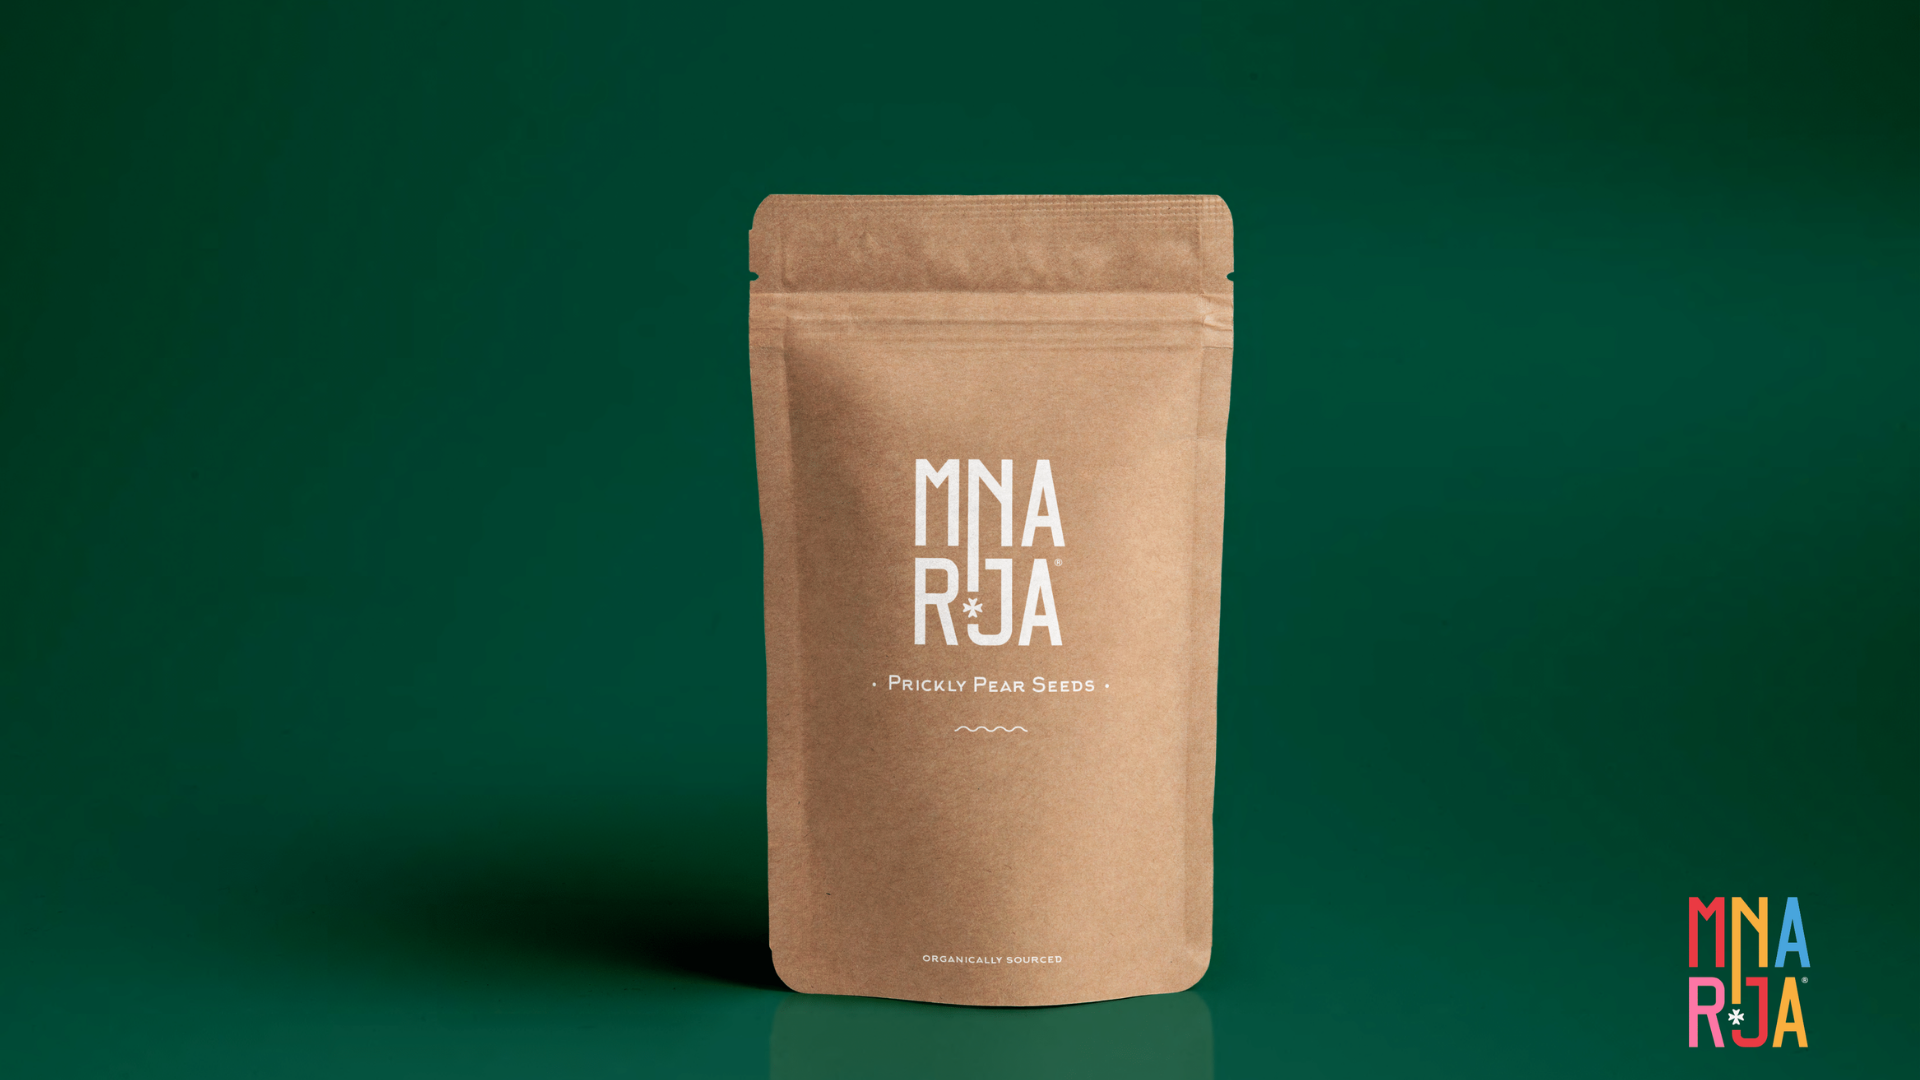 Merchandise, packaging brown paper bags with Mnarja Logo and text 'prickly pear seeds', 'organically sourced'